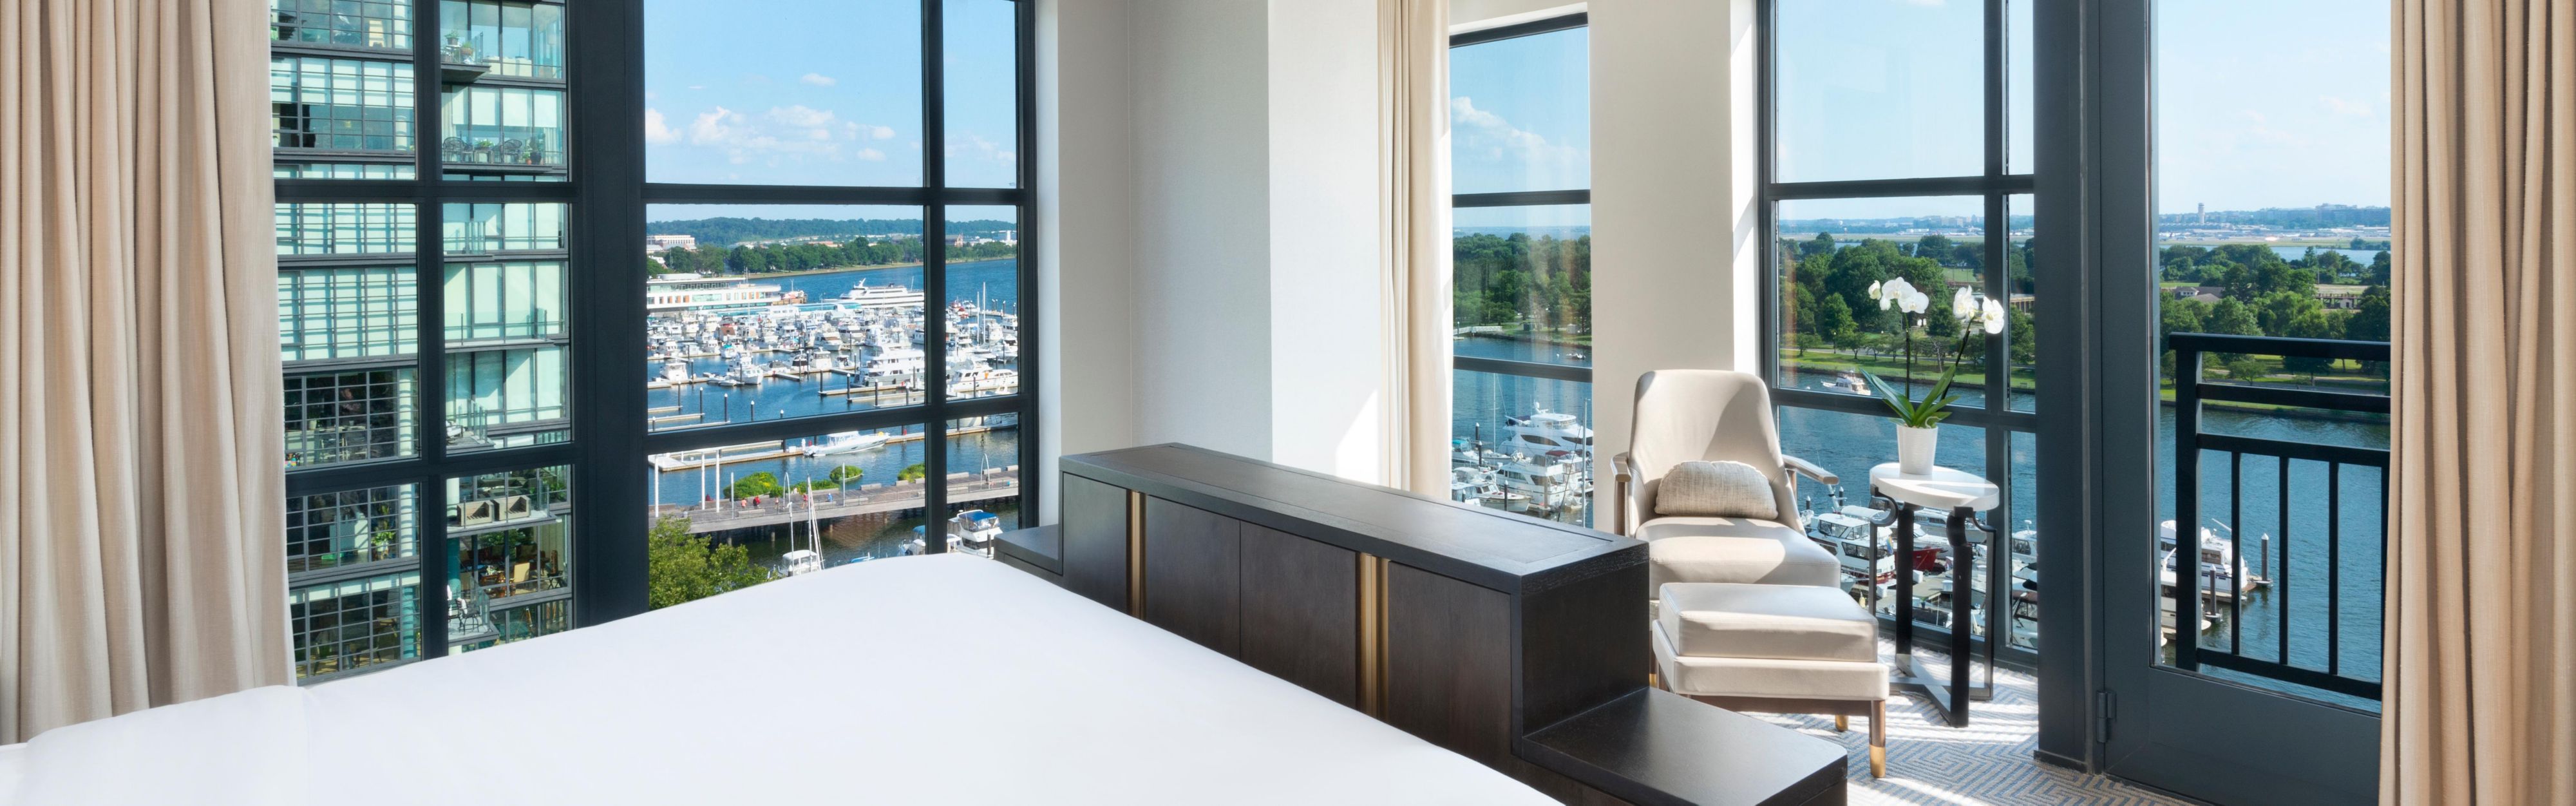 Compass Suite Bedroom with waterfront view 